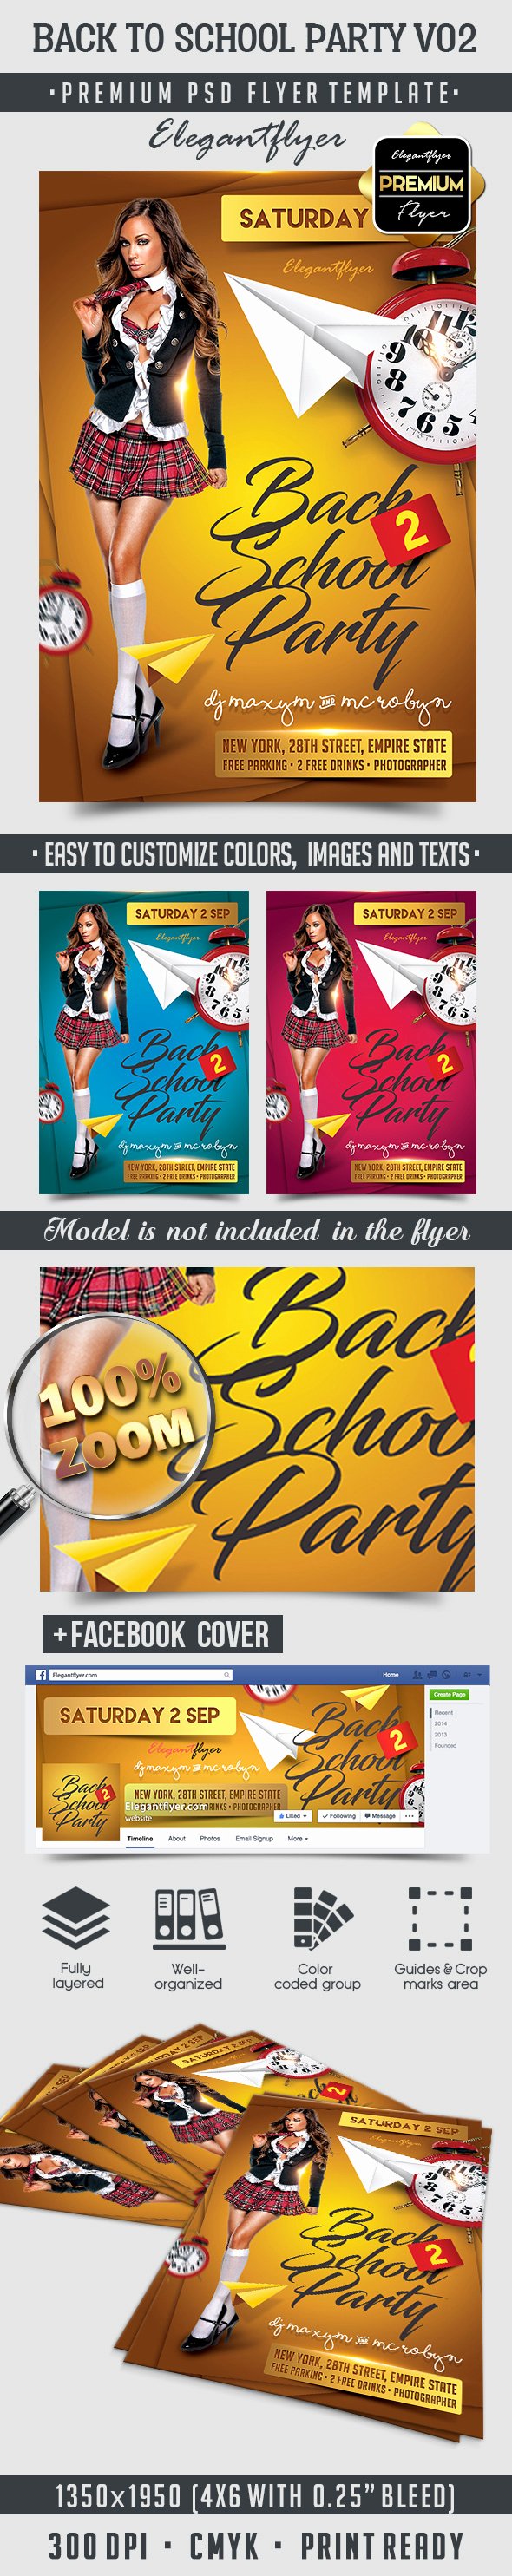 Back to School Flyer Template Lovely Back to School Party V02 – Flyer Psd Template – by Elegantflyer